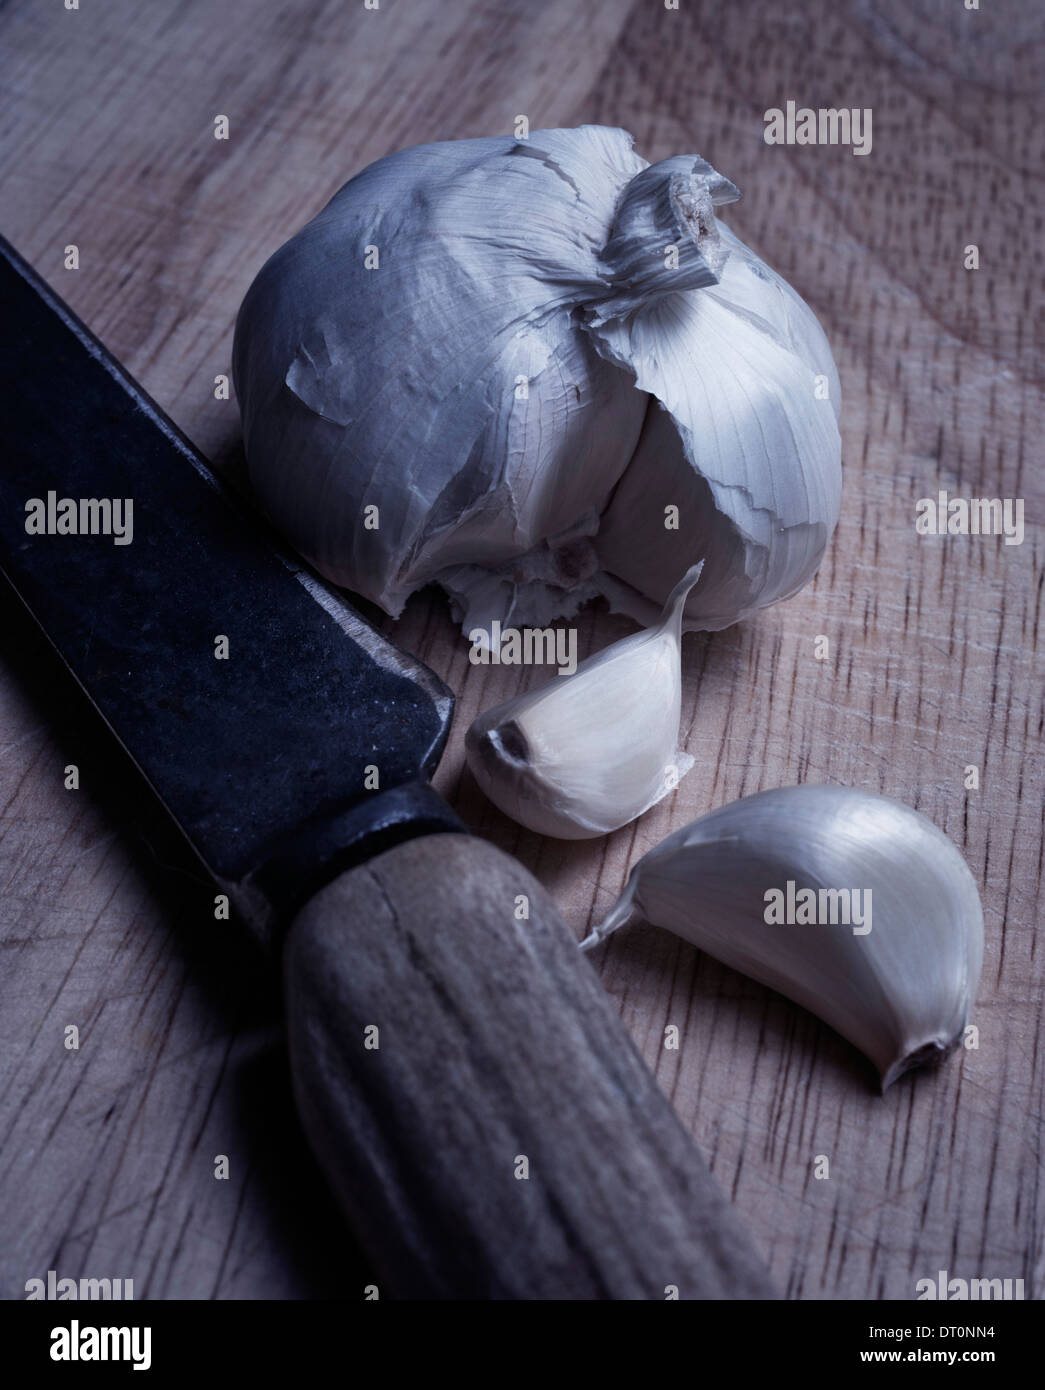 Garlic clove sits separately in front of garlic bulb on rustic wooden table. Rustic, bone-handled knife accompanies garlic. Stock Photo